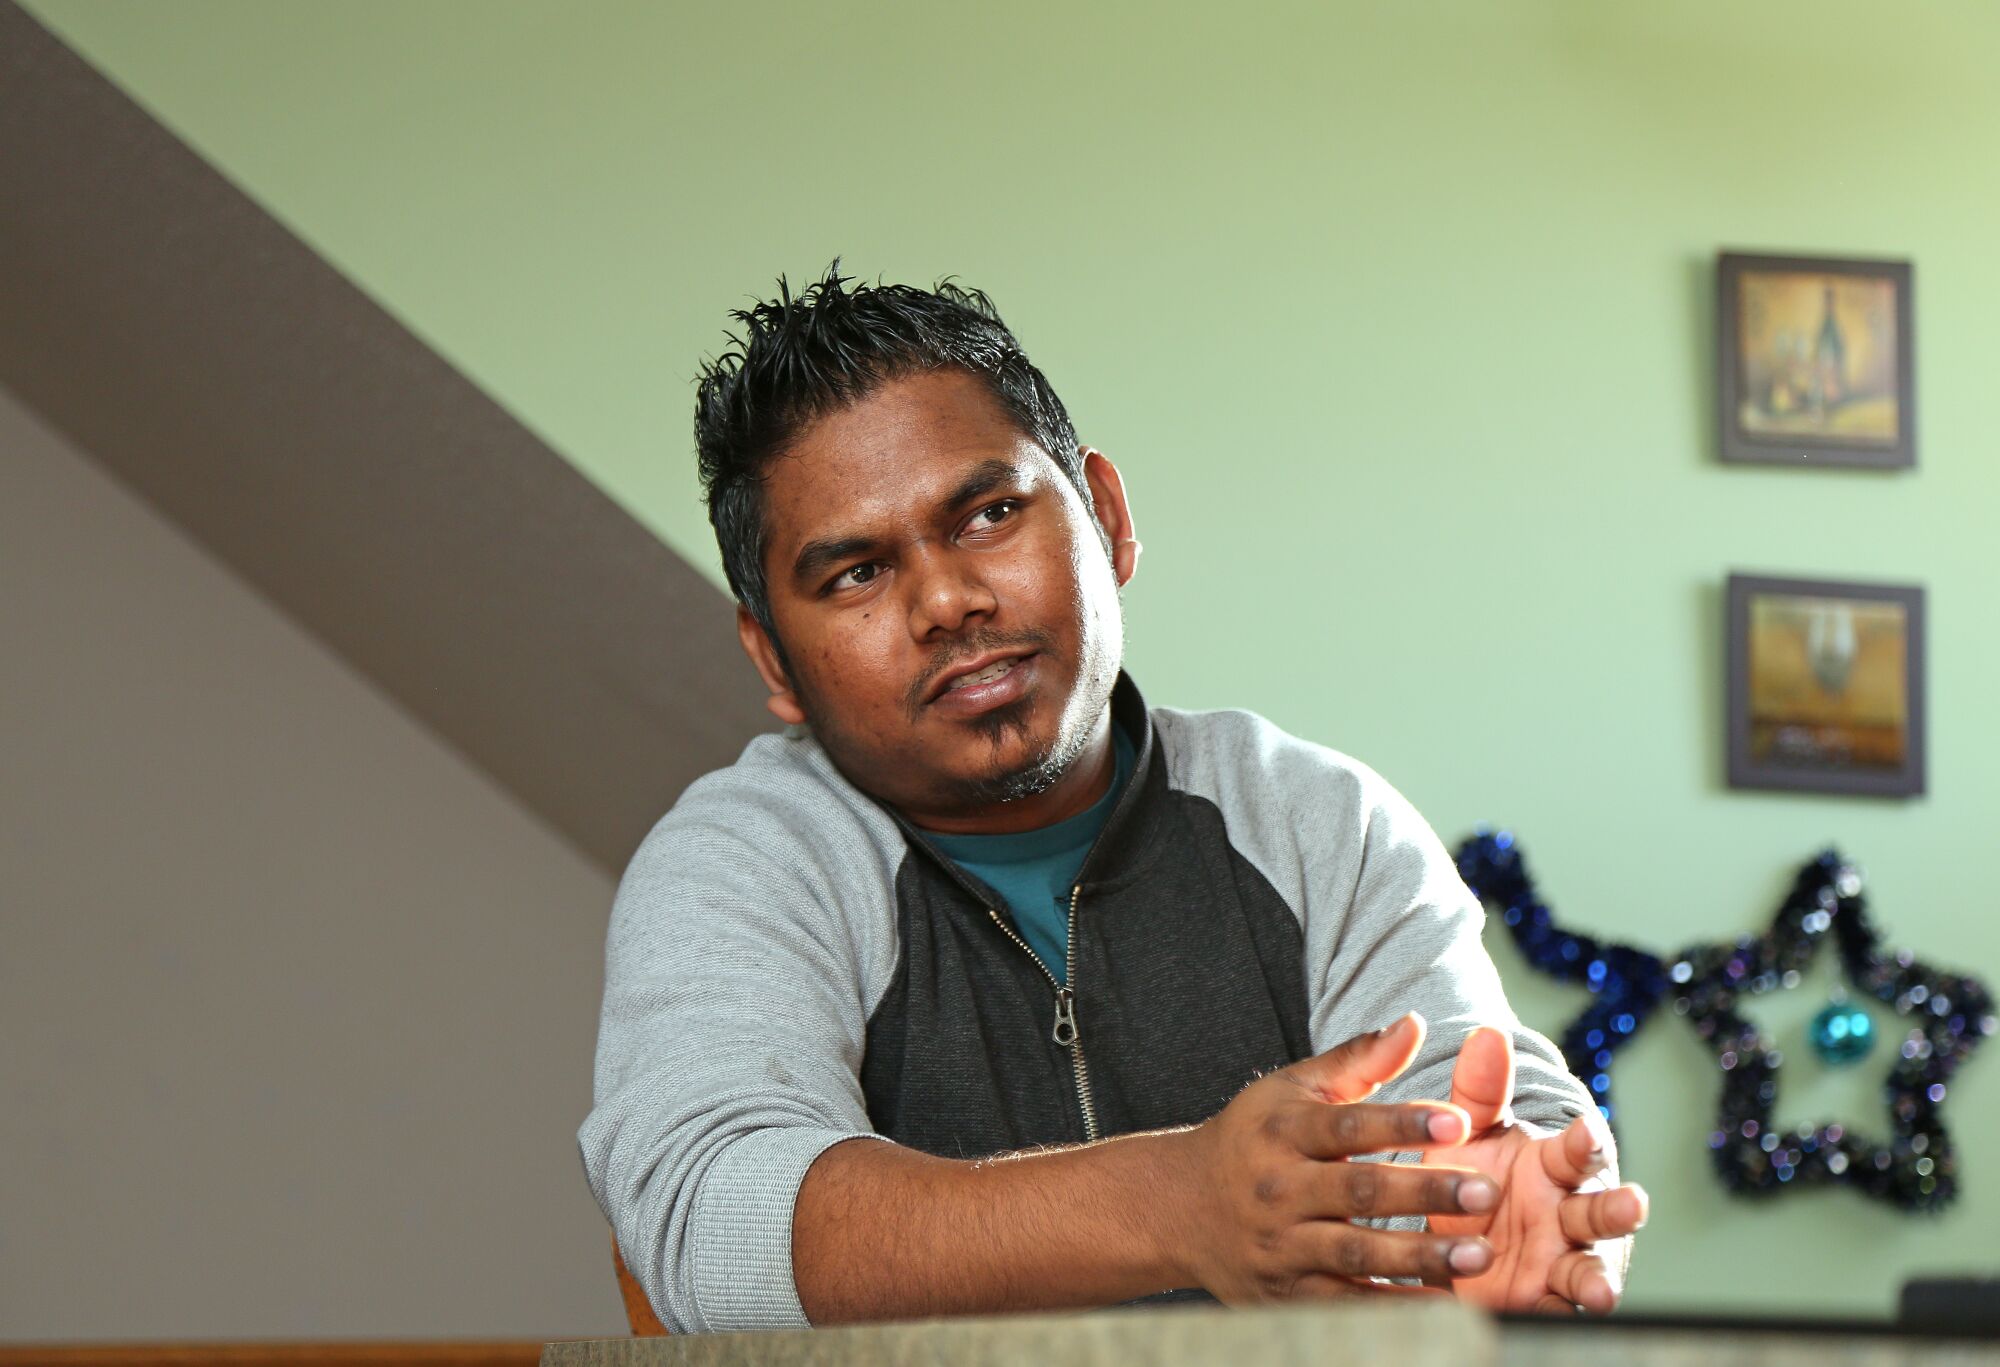 Sujeet Urwan, 31, is an electrician at the Smithfield pork factory in Sioux Falls.